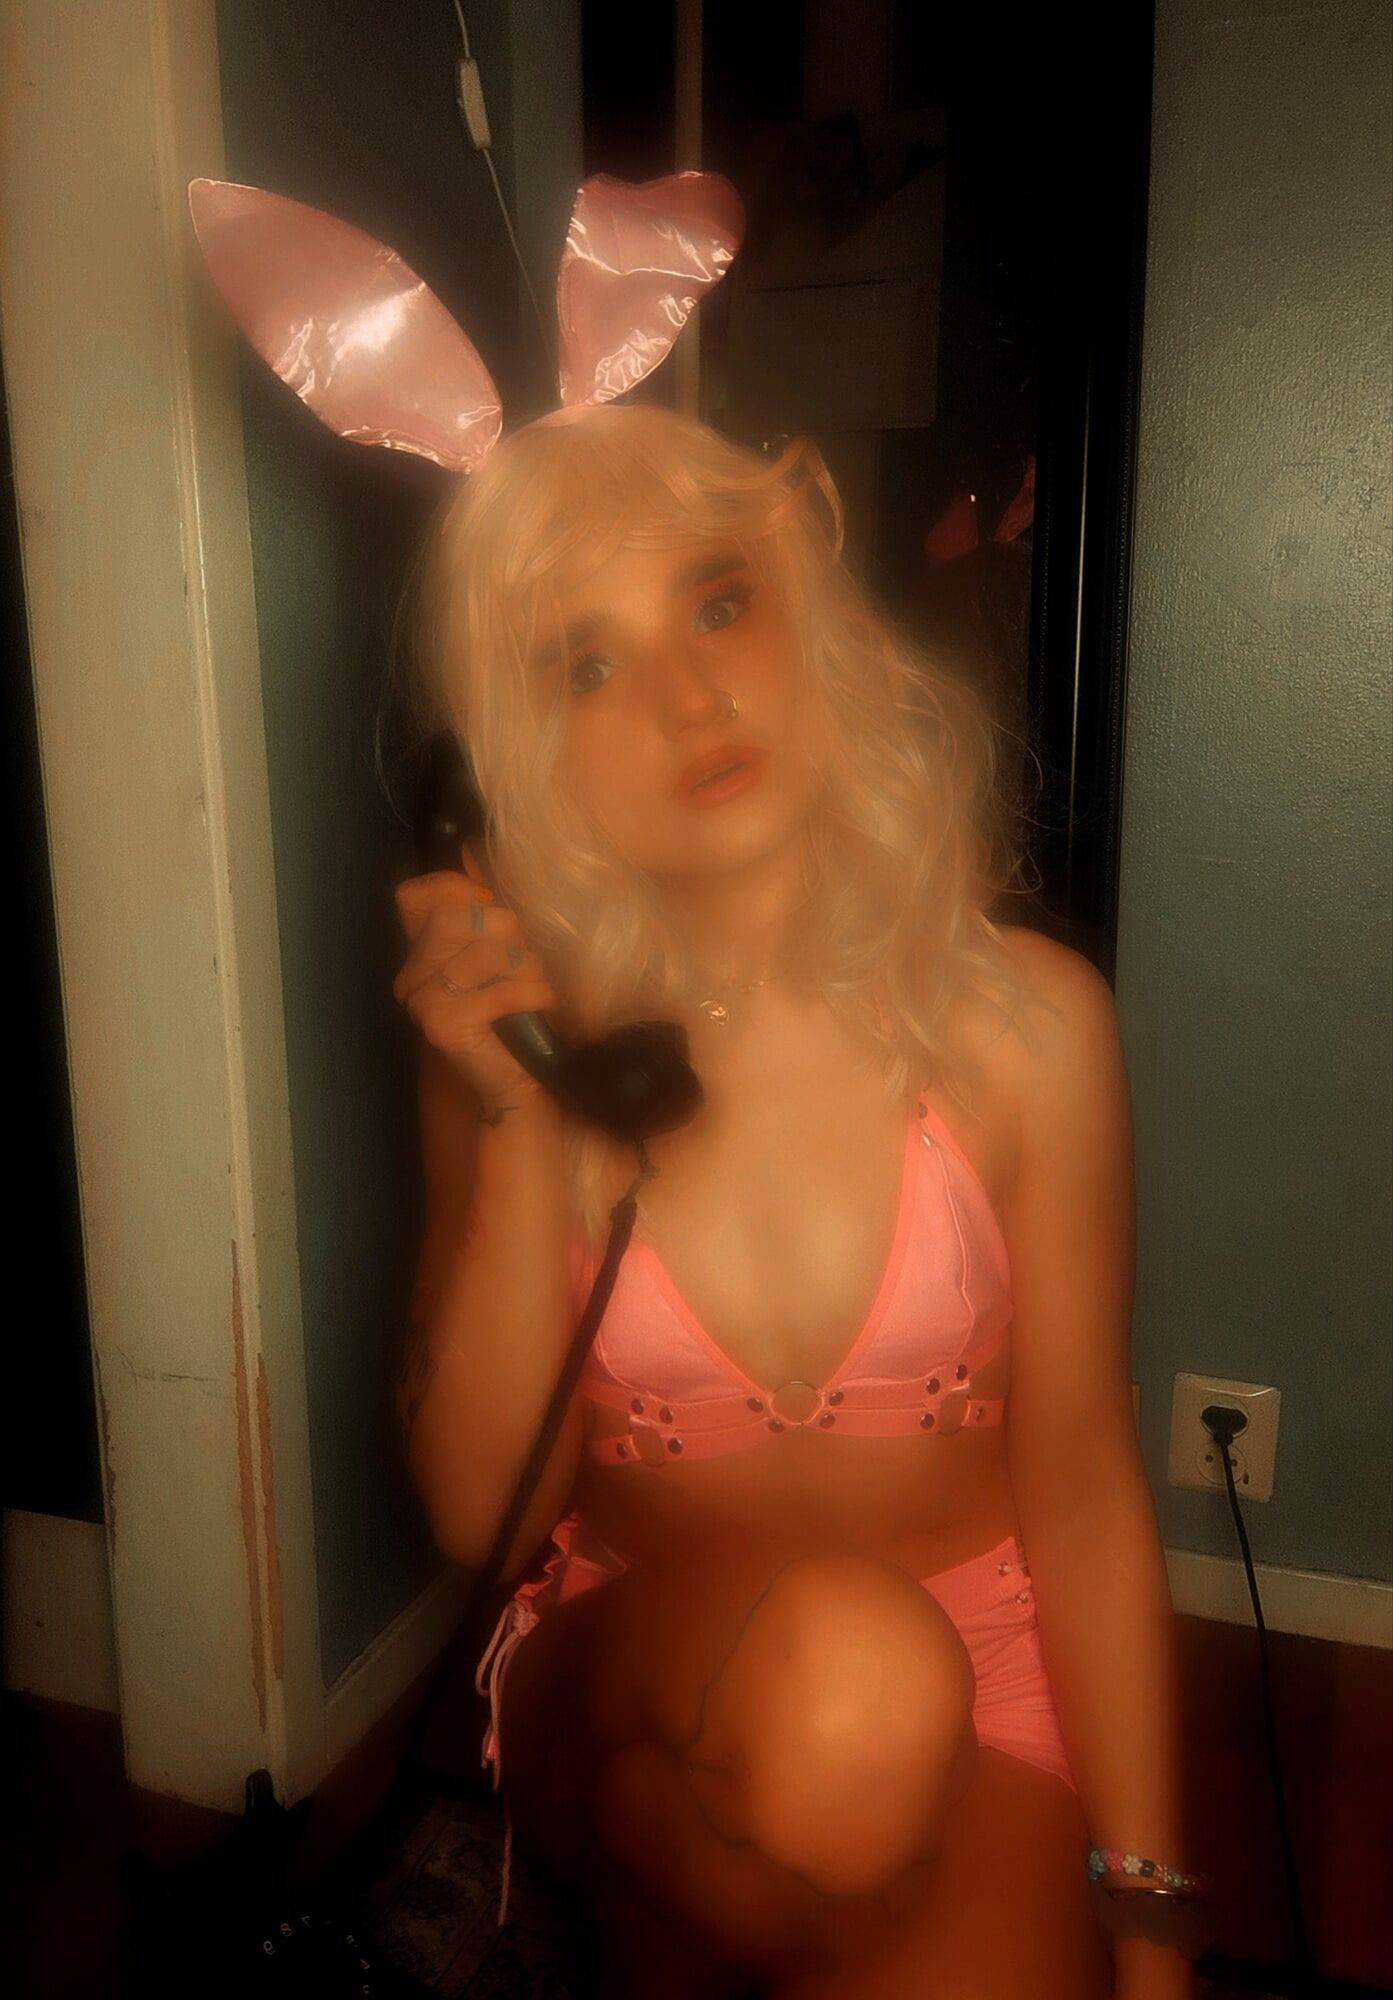 Pink bunny talking on the phone while showing off pussy #48